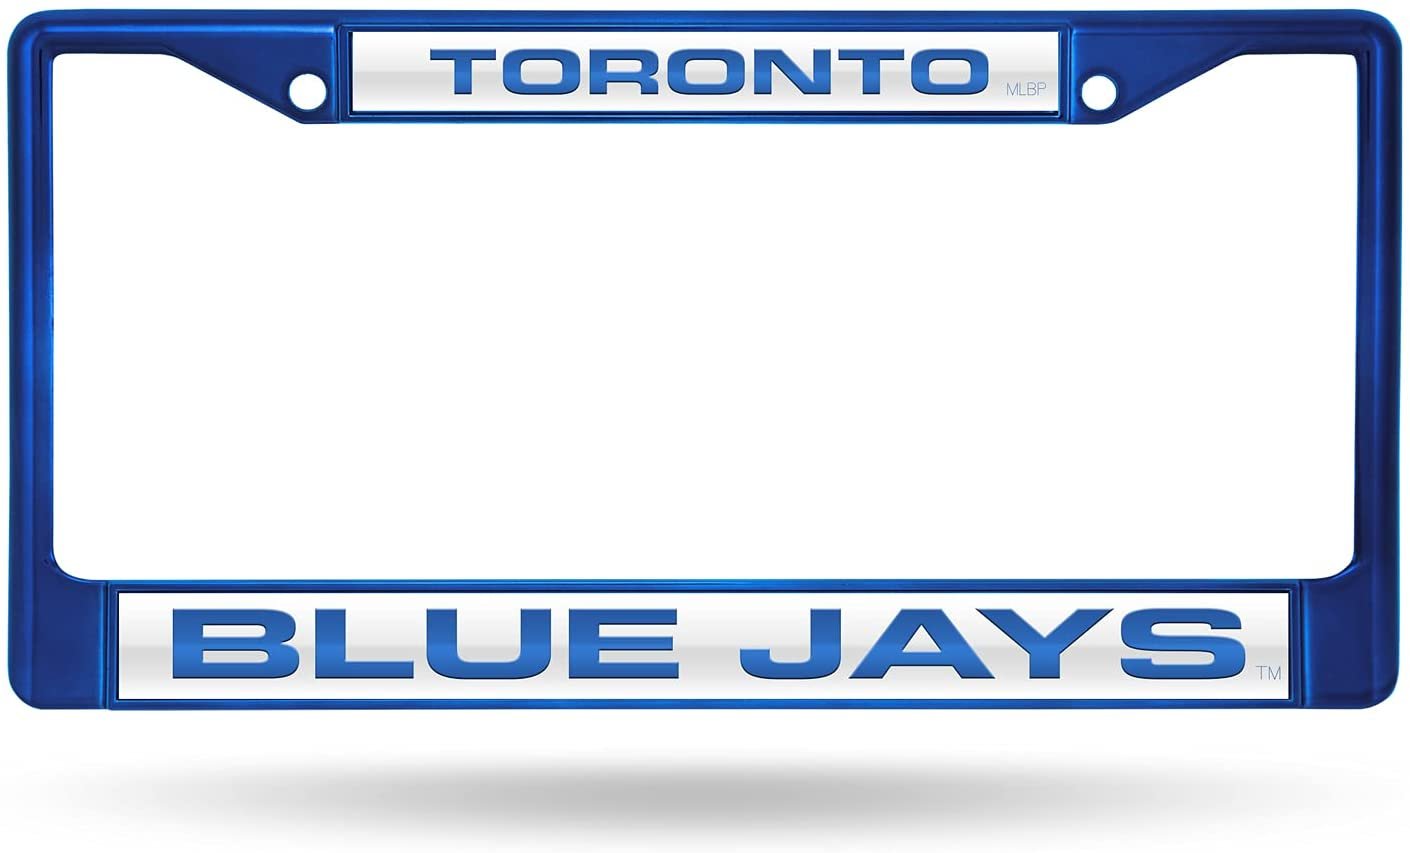 Toronto Blue Jays Blue Metal License Plate Frame Tag Cover, Laser Acrylic Mirrored Inserts, 12x6 Inch